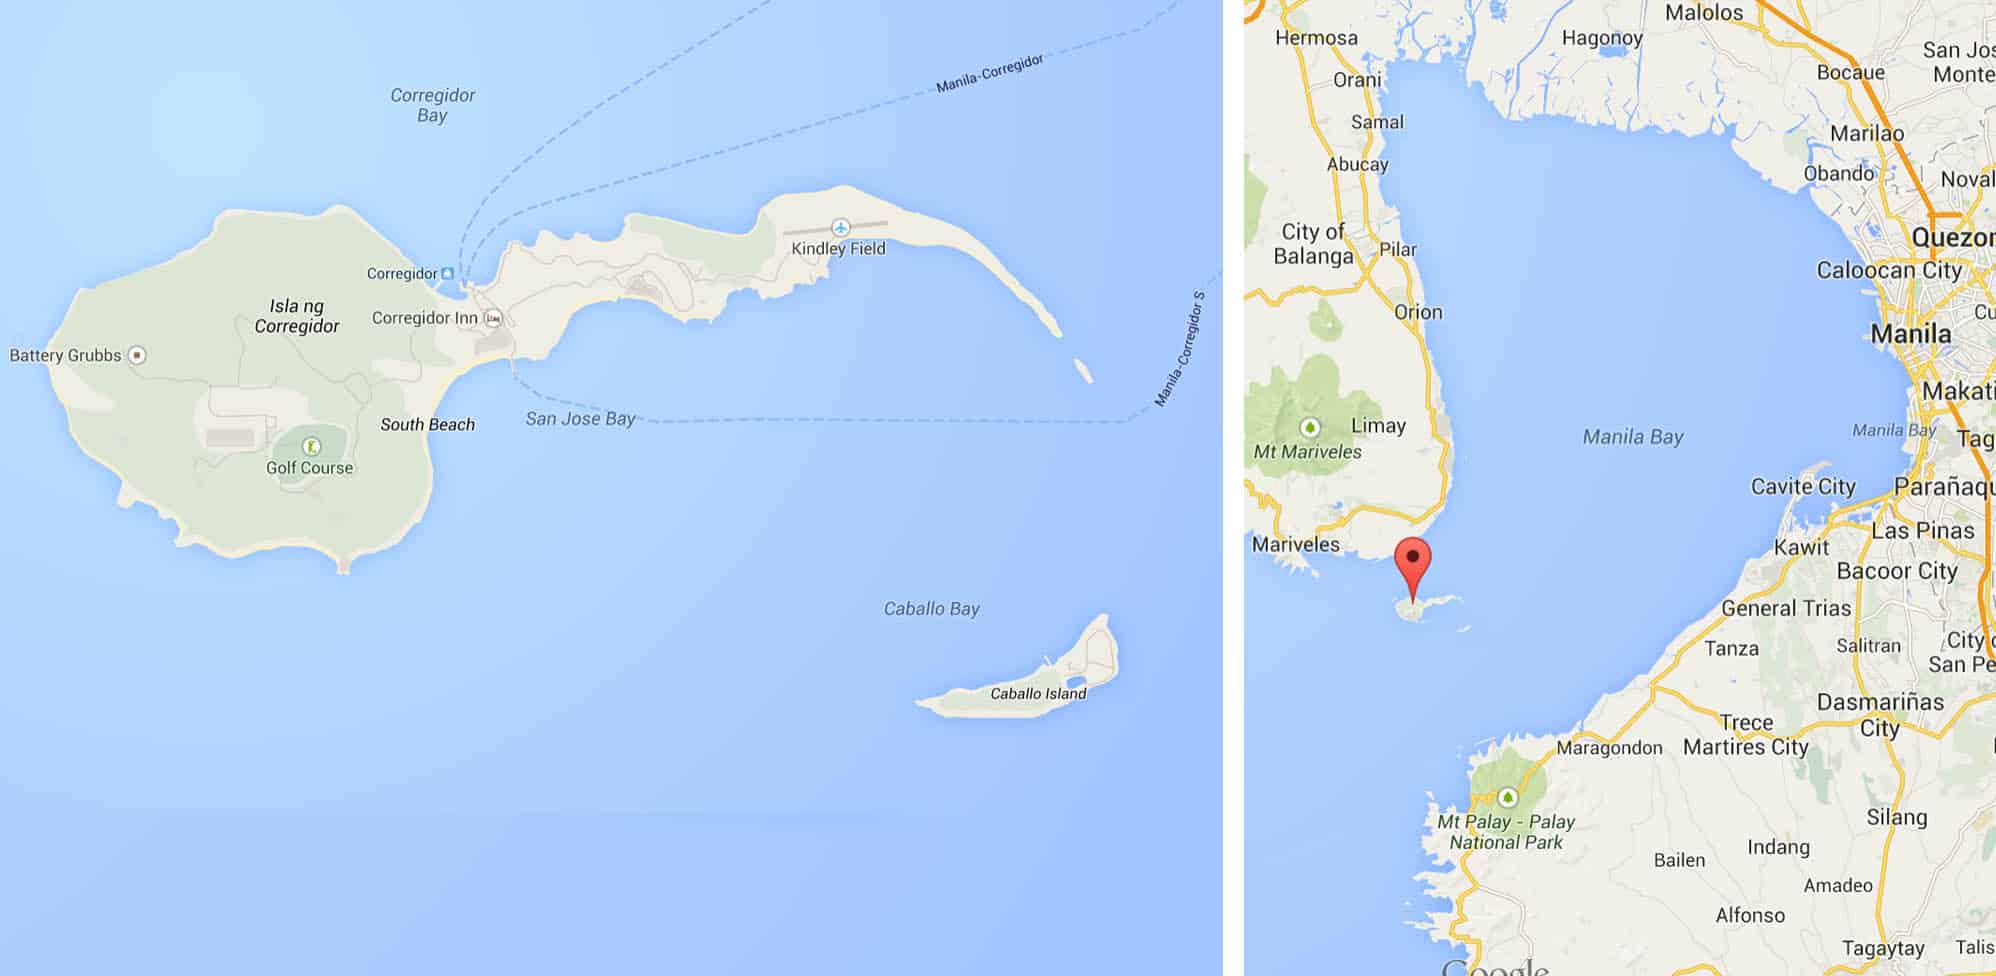 Corregidor Island and its position in Manila Bay. Alright, I'll say it. It looks like a sperm cell.